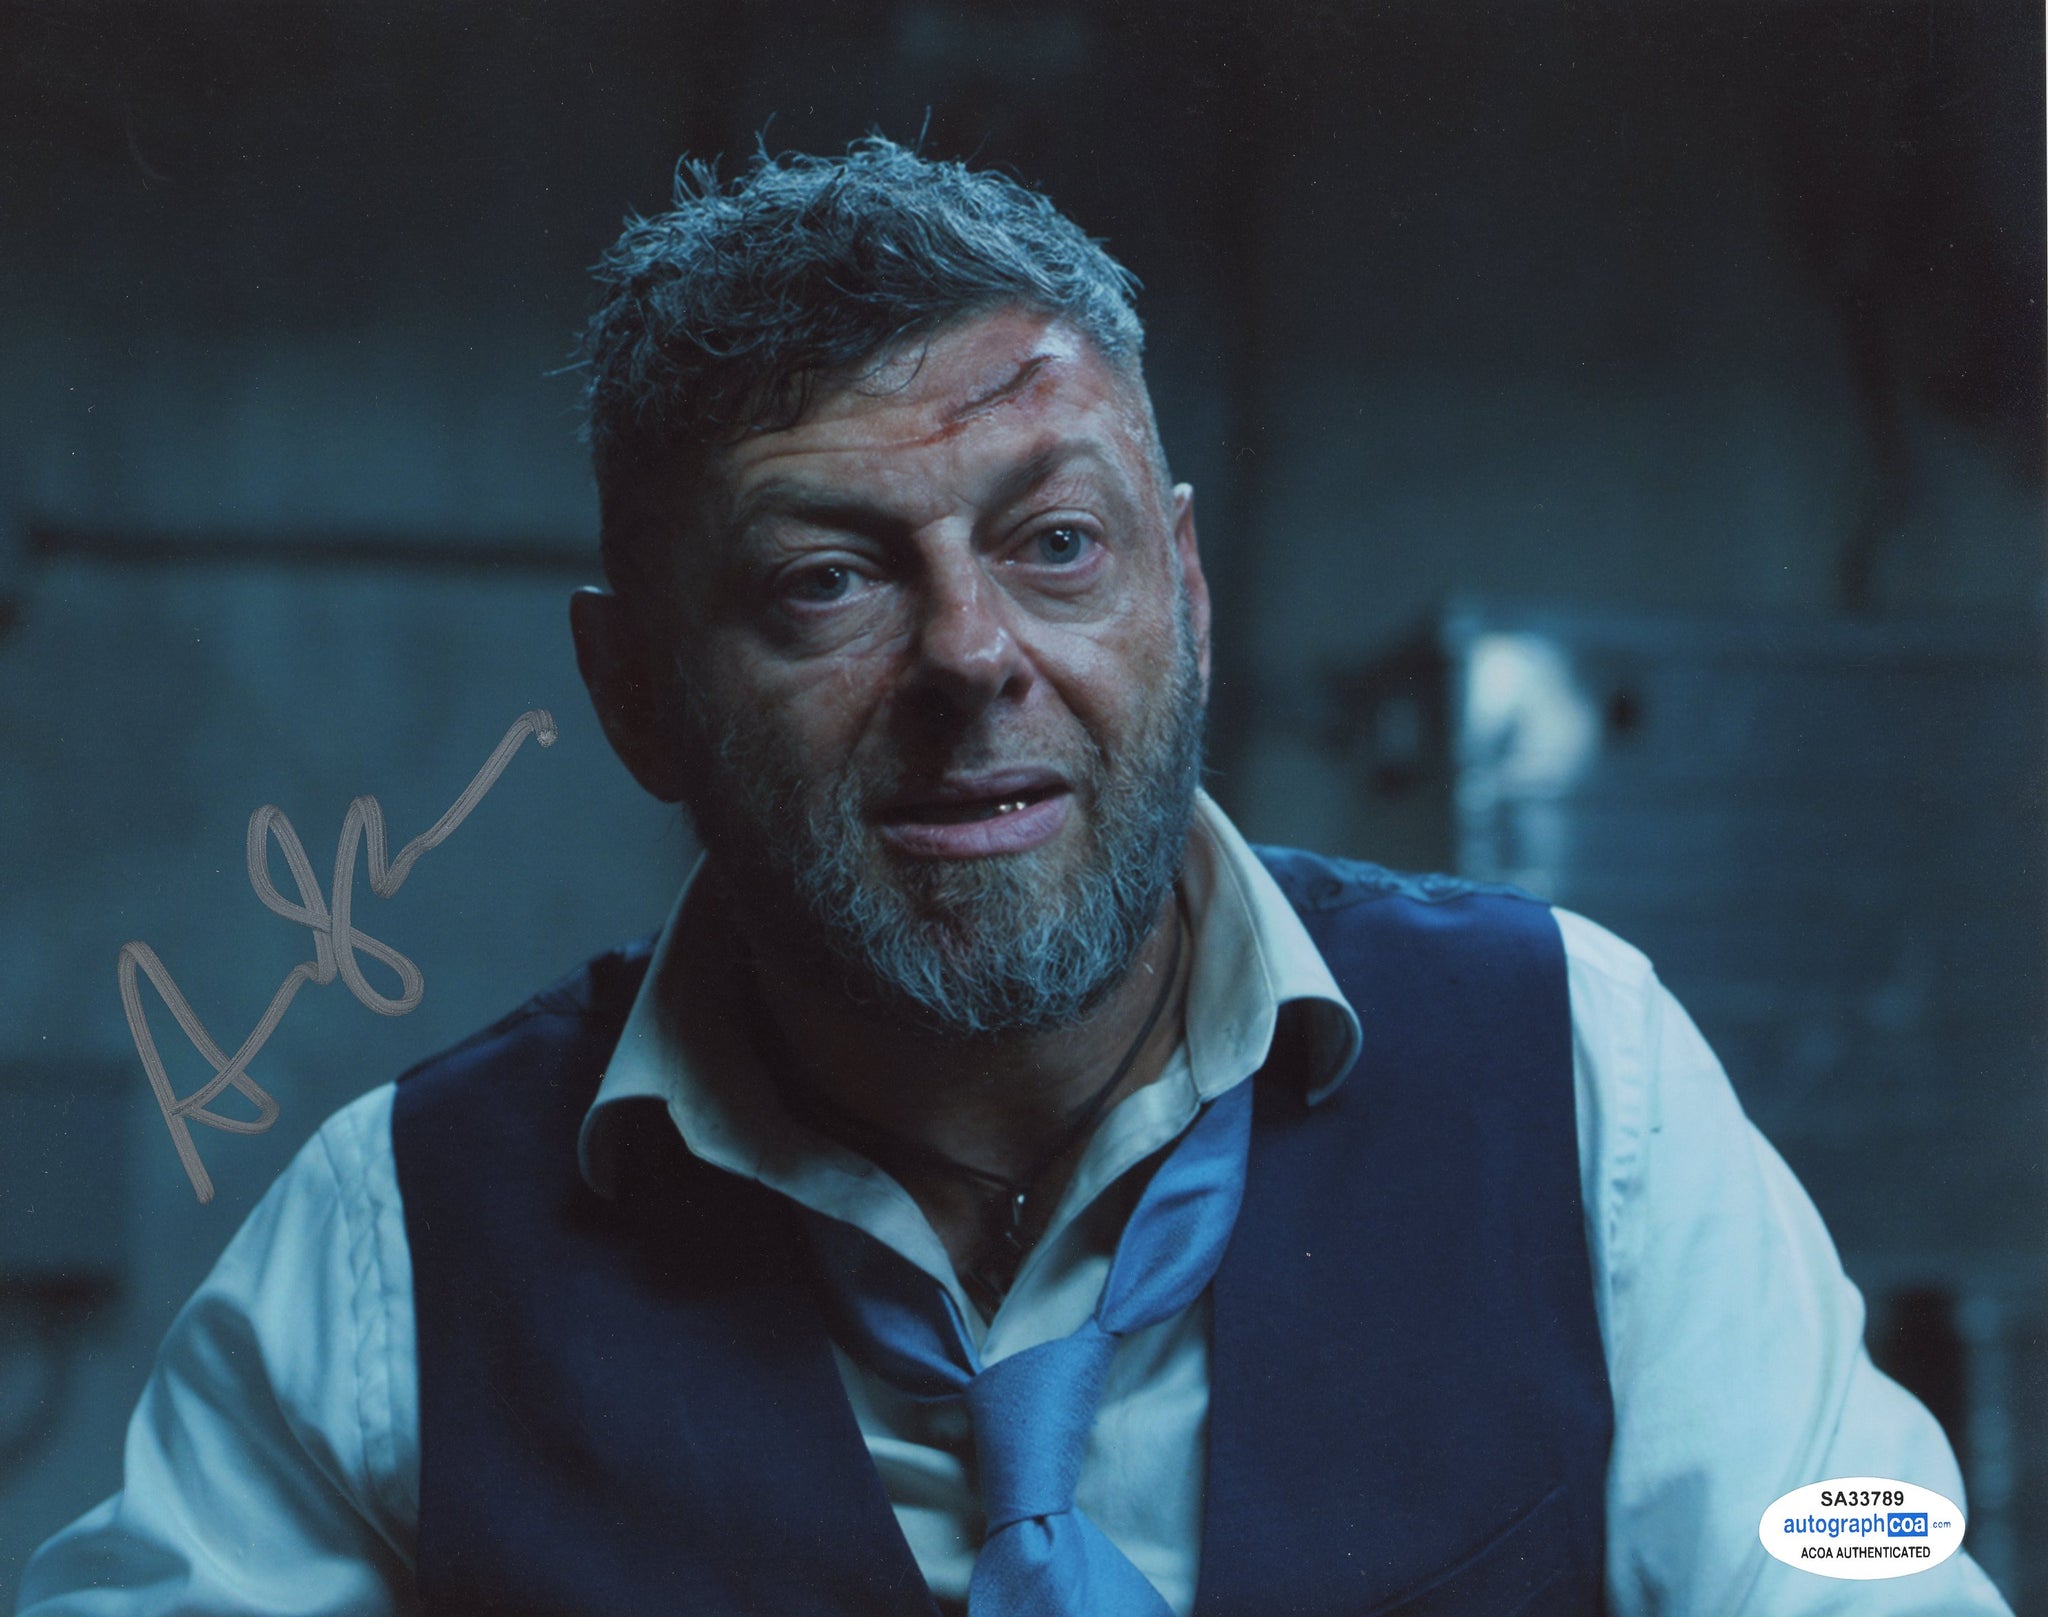 Andy Serkis Black Panther Signed Autograph 8x10 Photo ACOA #17 - Outlaw Hobbies Authentic Autographs